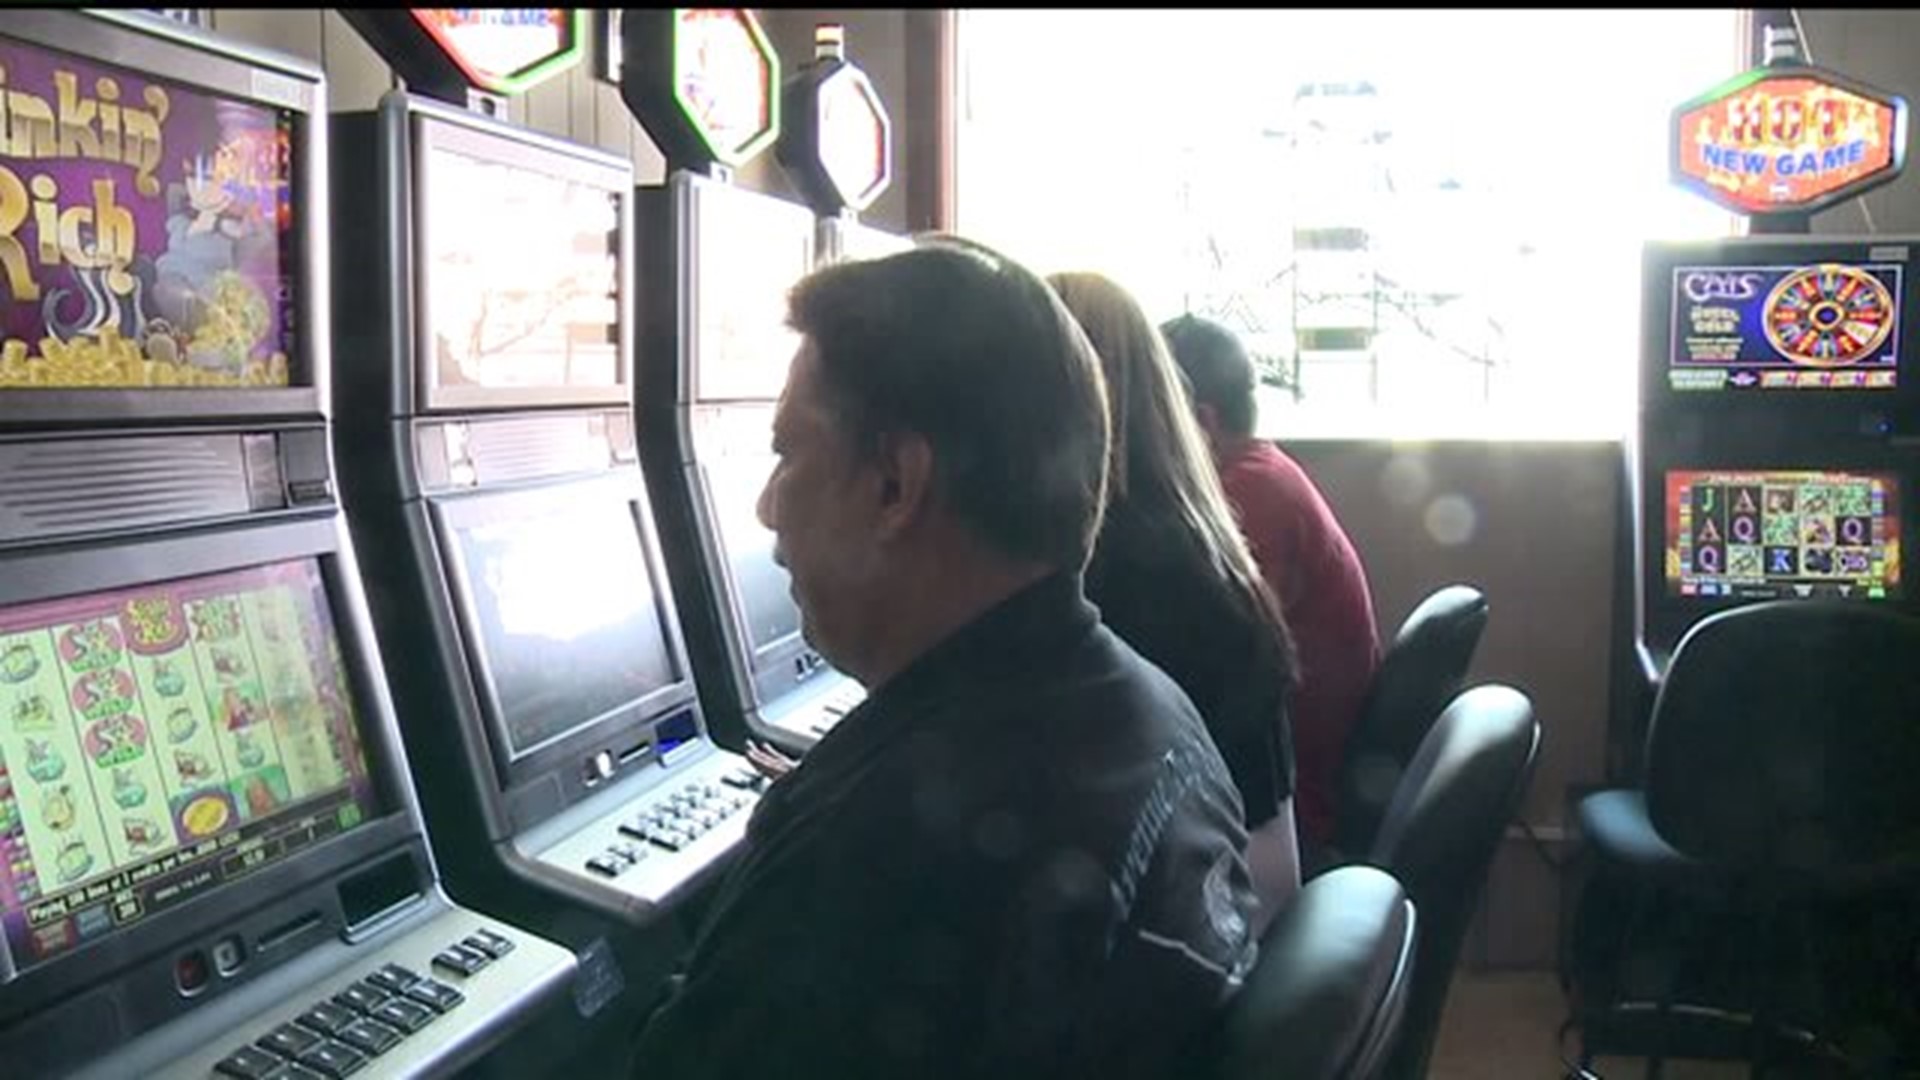 Illinois sees slow down in video gambling.